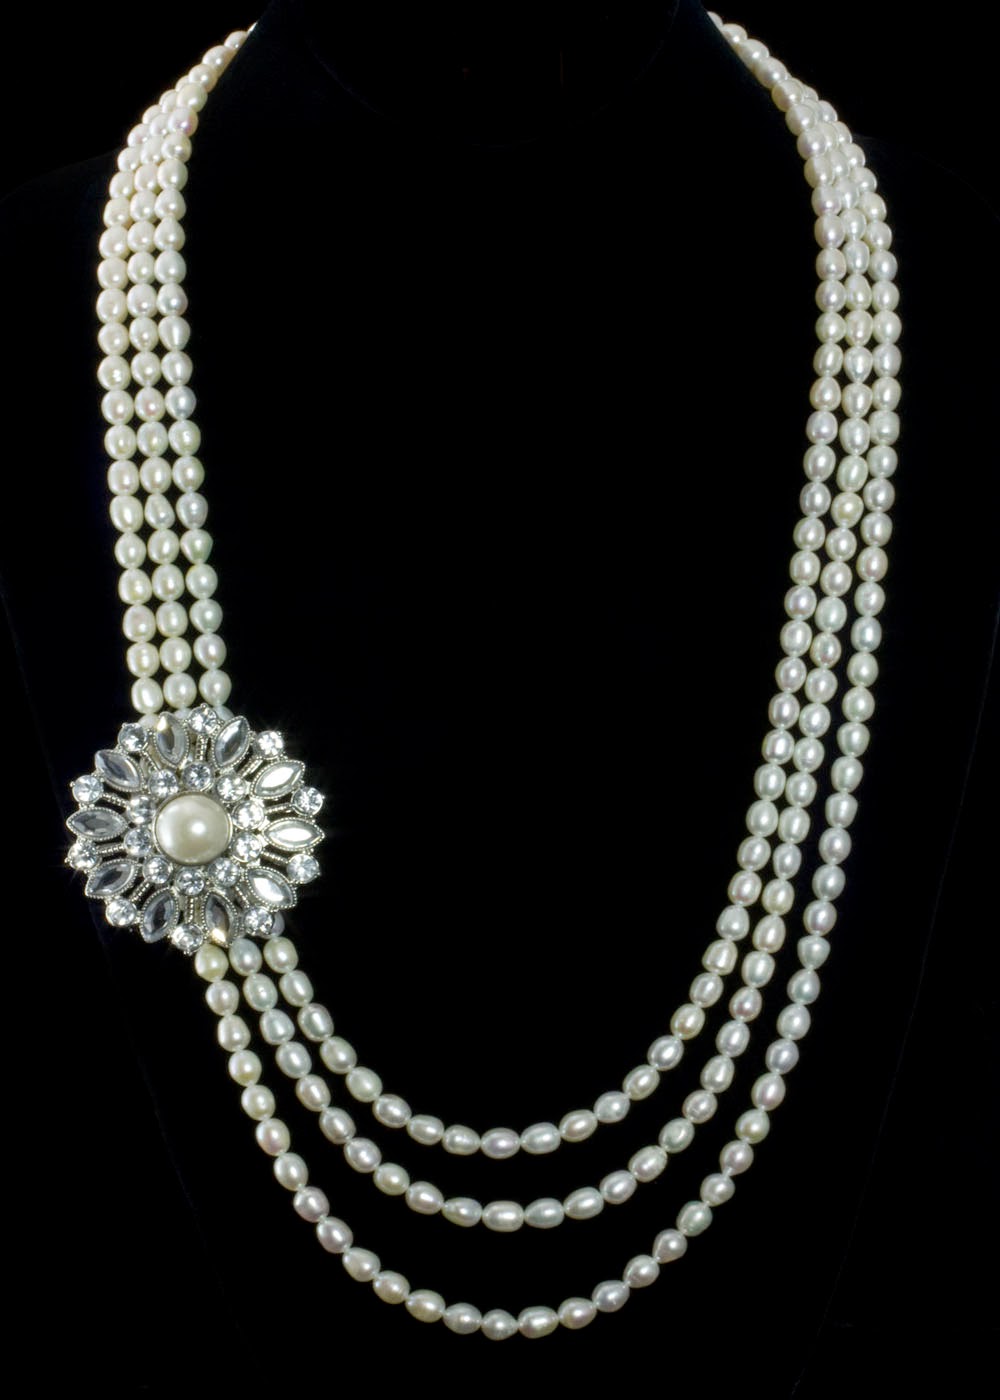 pearl necklaces with pendant flowers